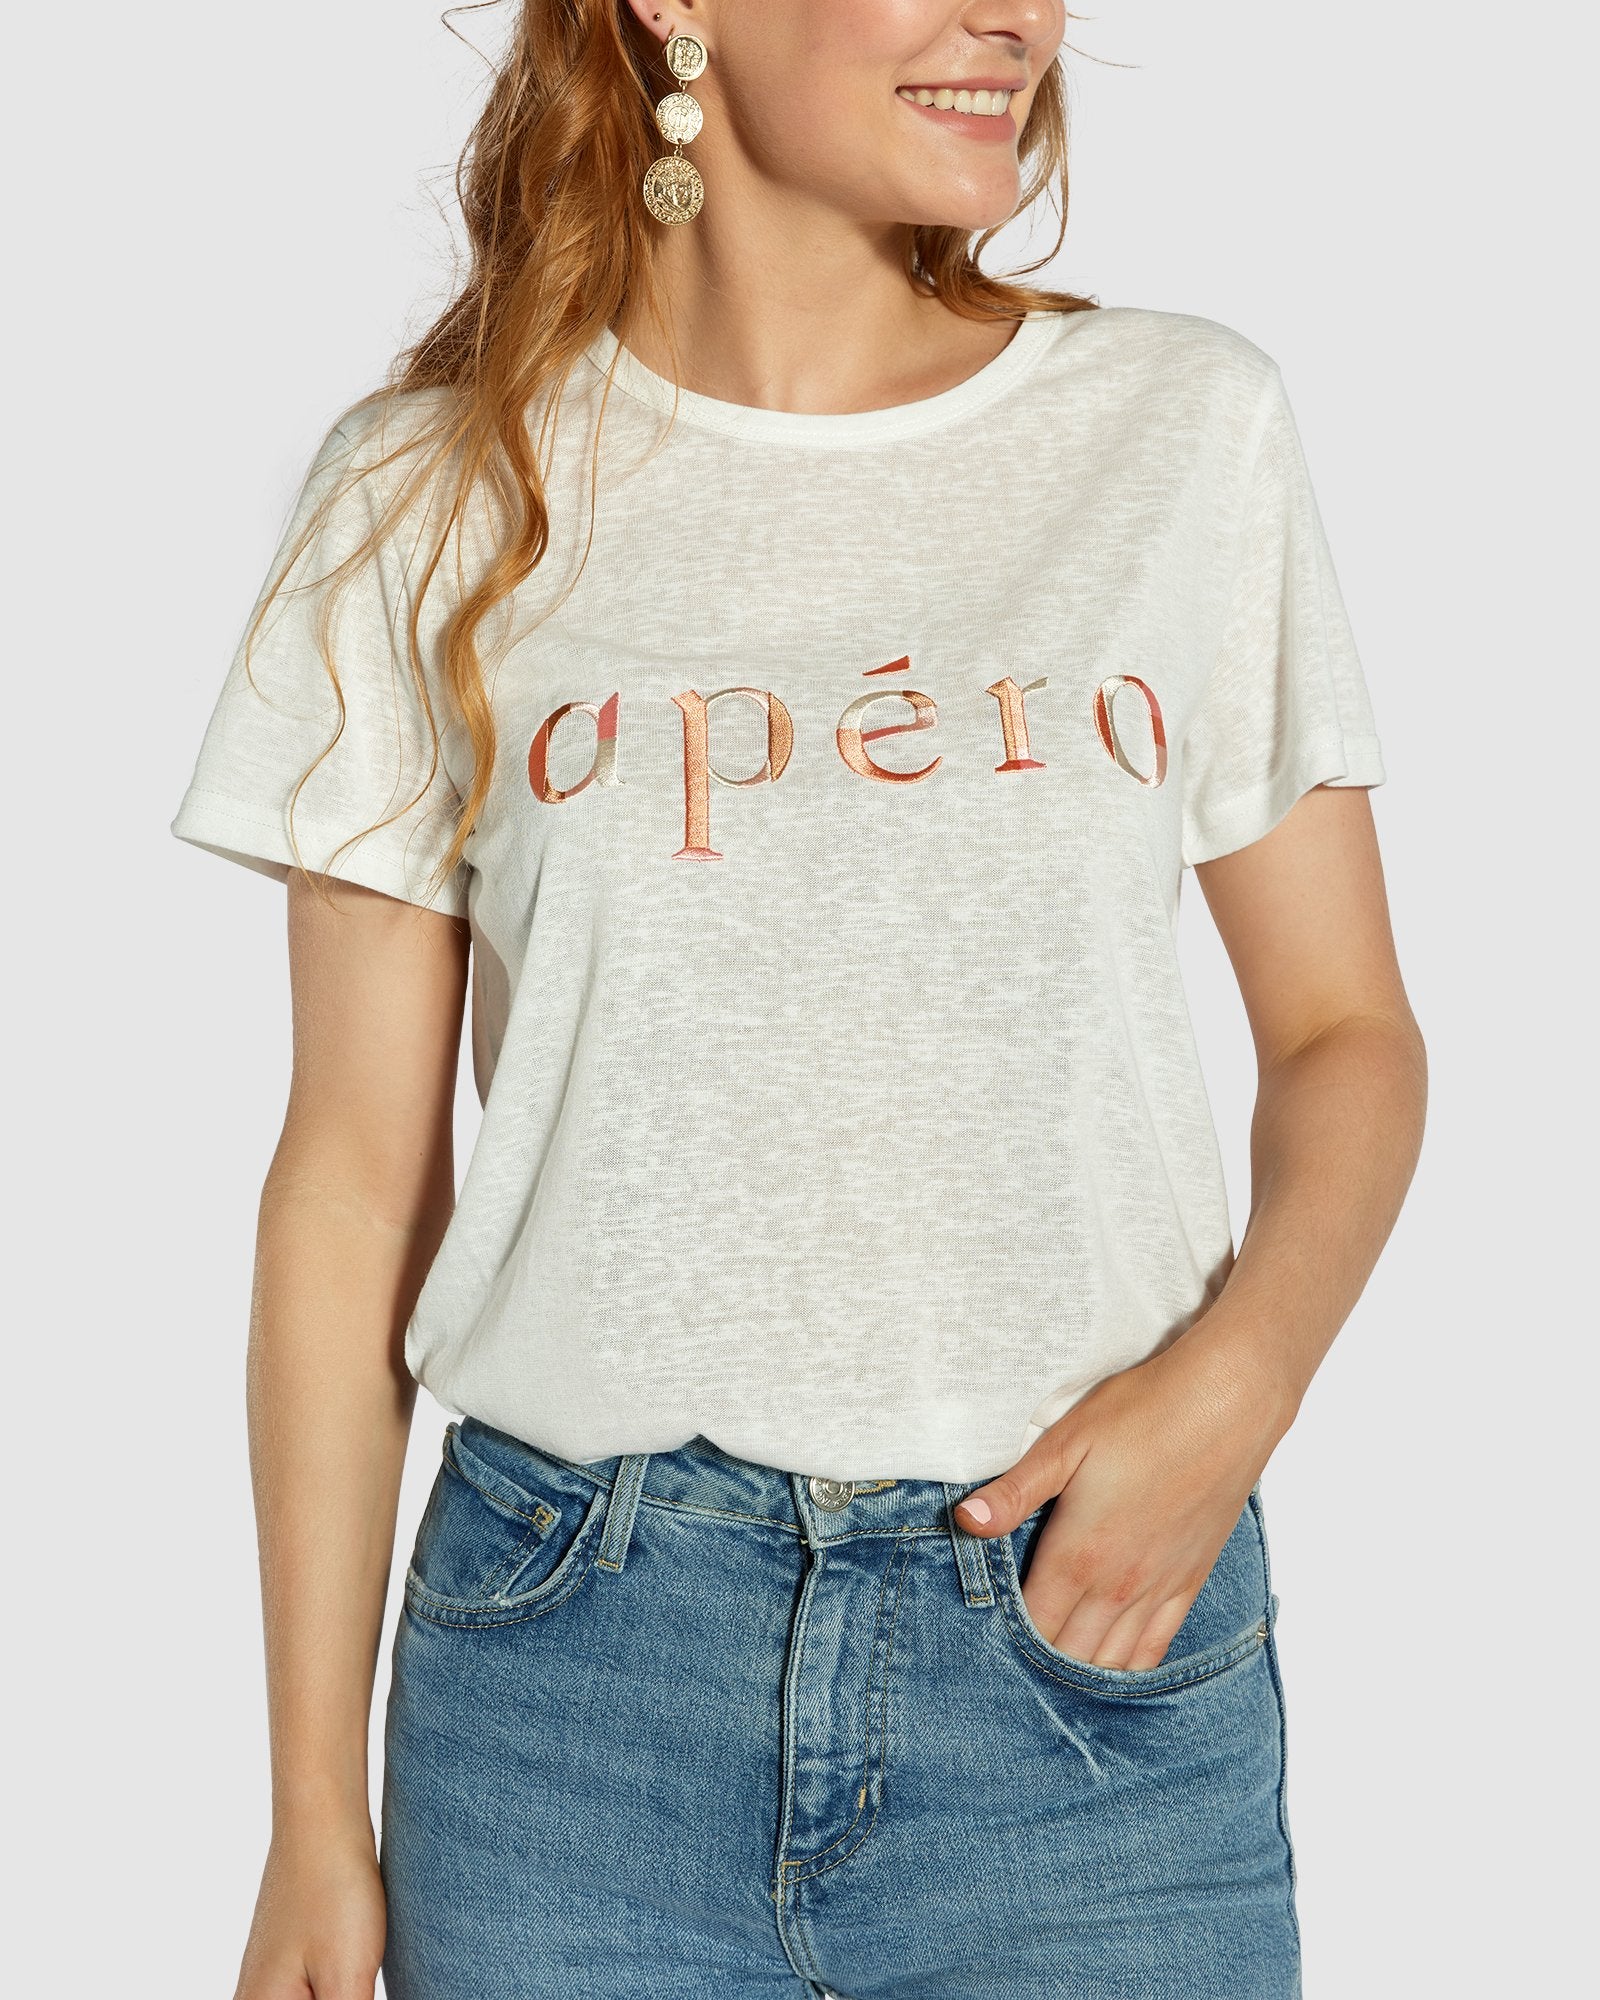 Apero Marble Emroided Femme Tee in White/Multi